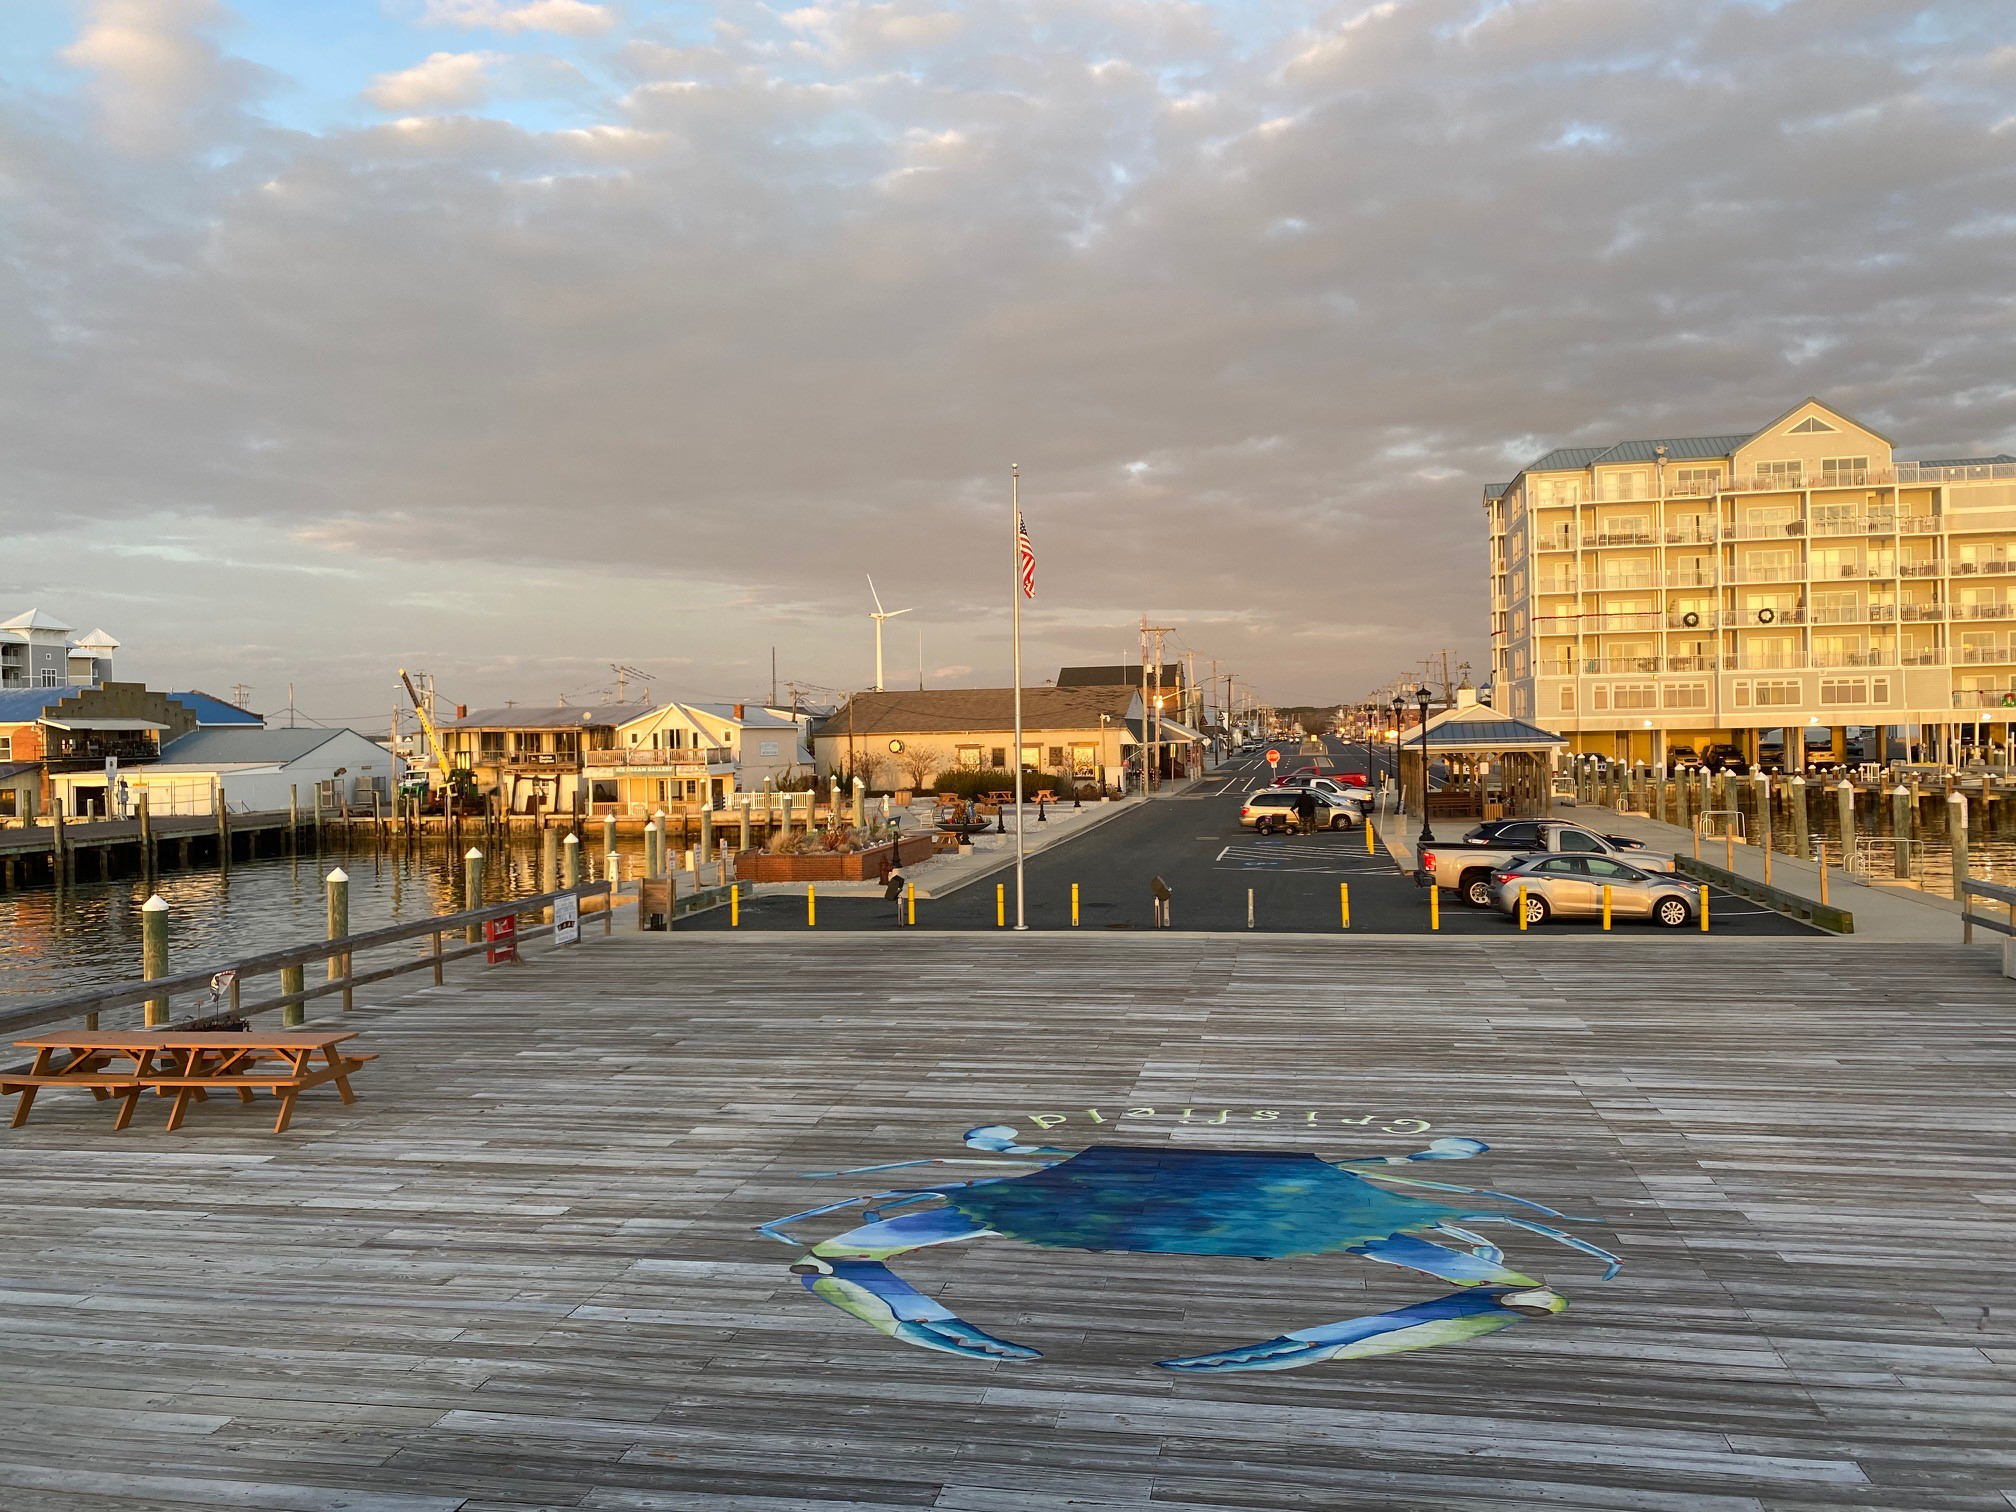 Crisfield, Maryland is known as the Seafood Capital of the World.